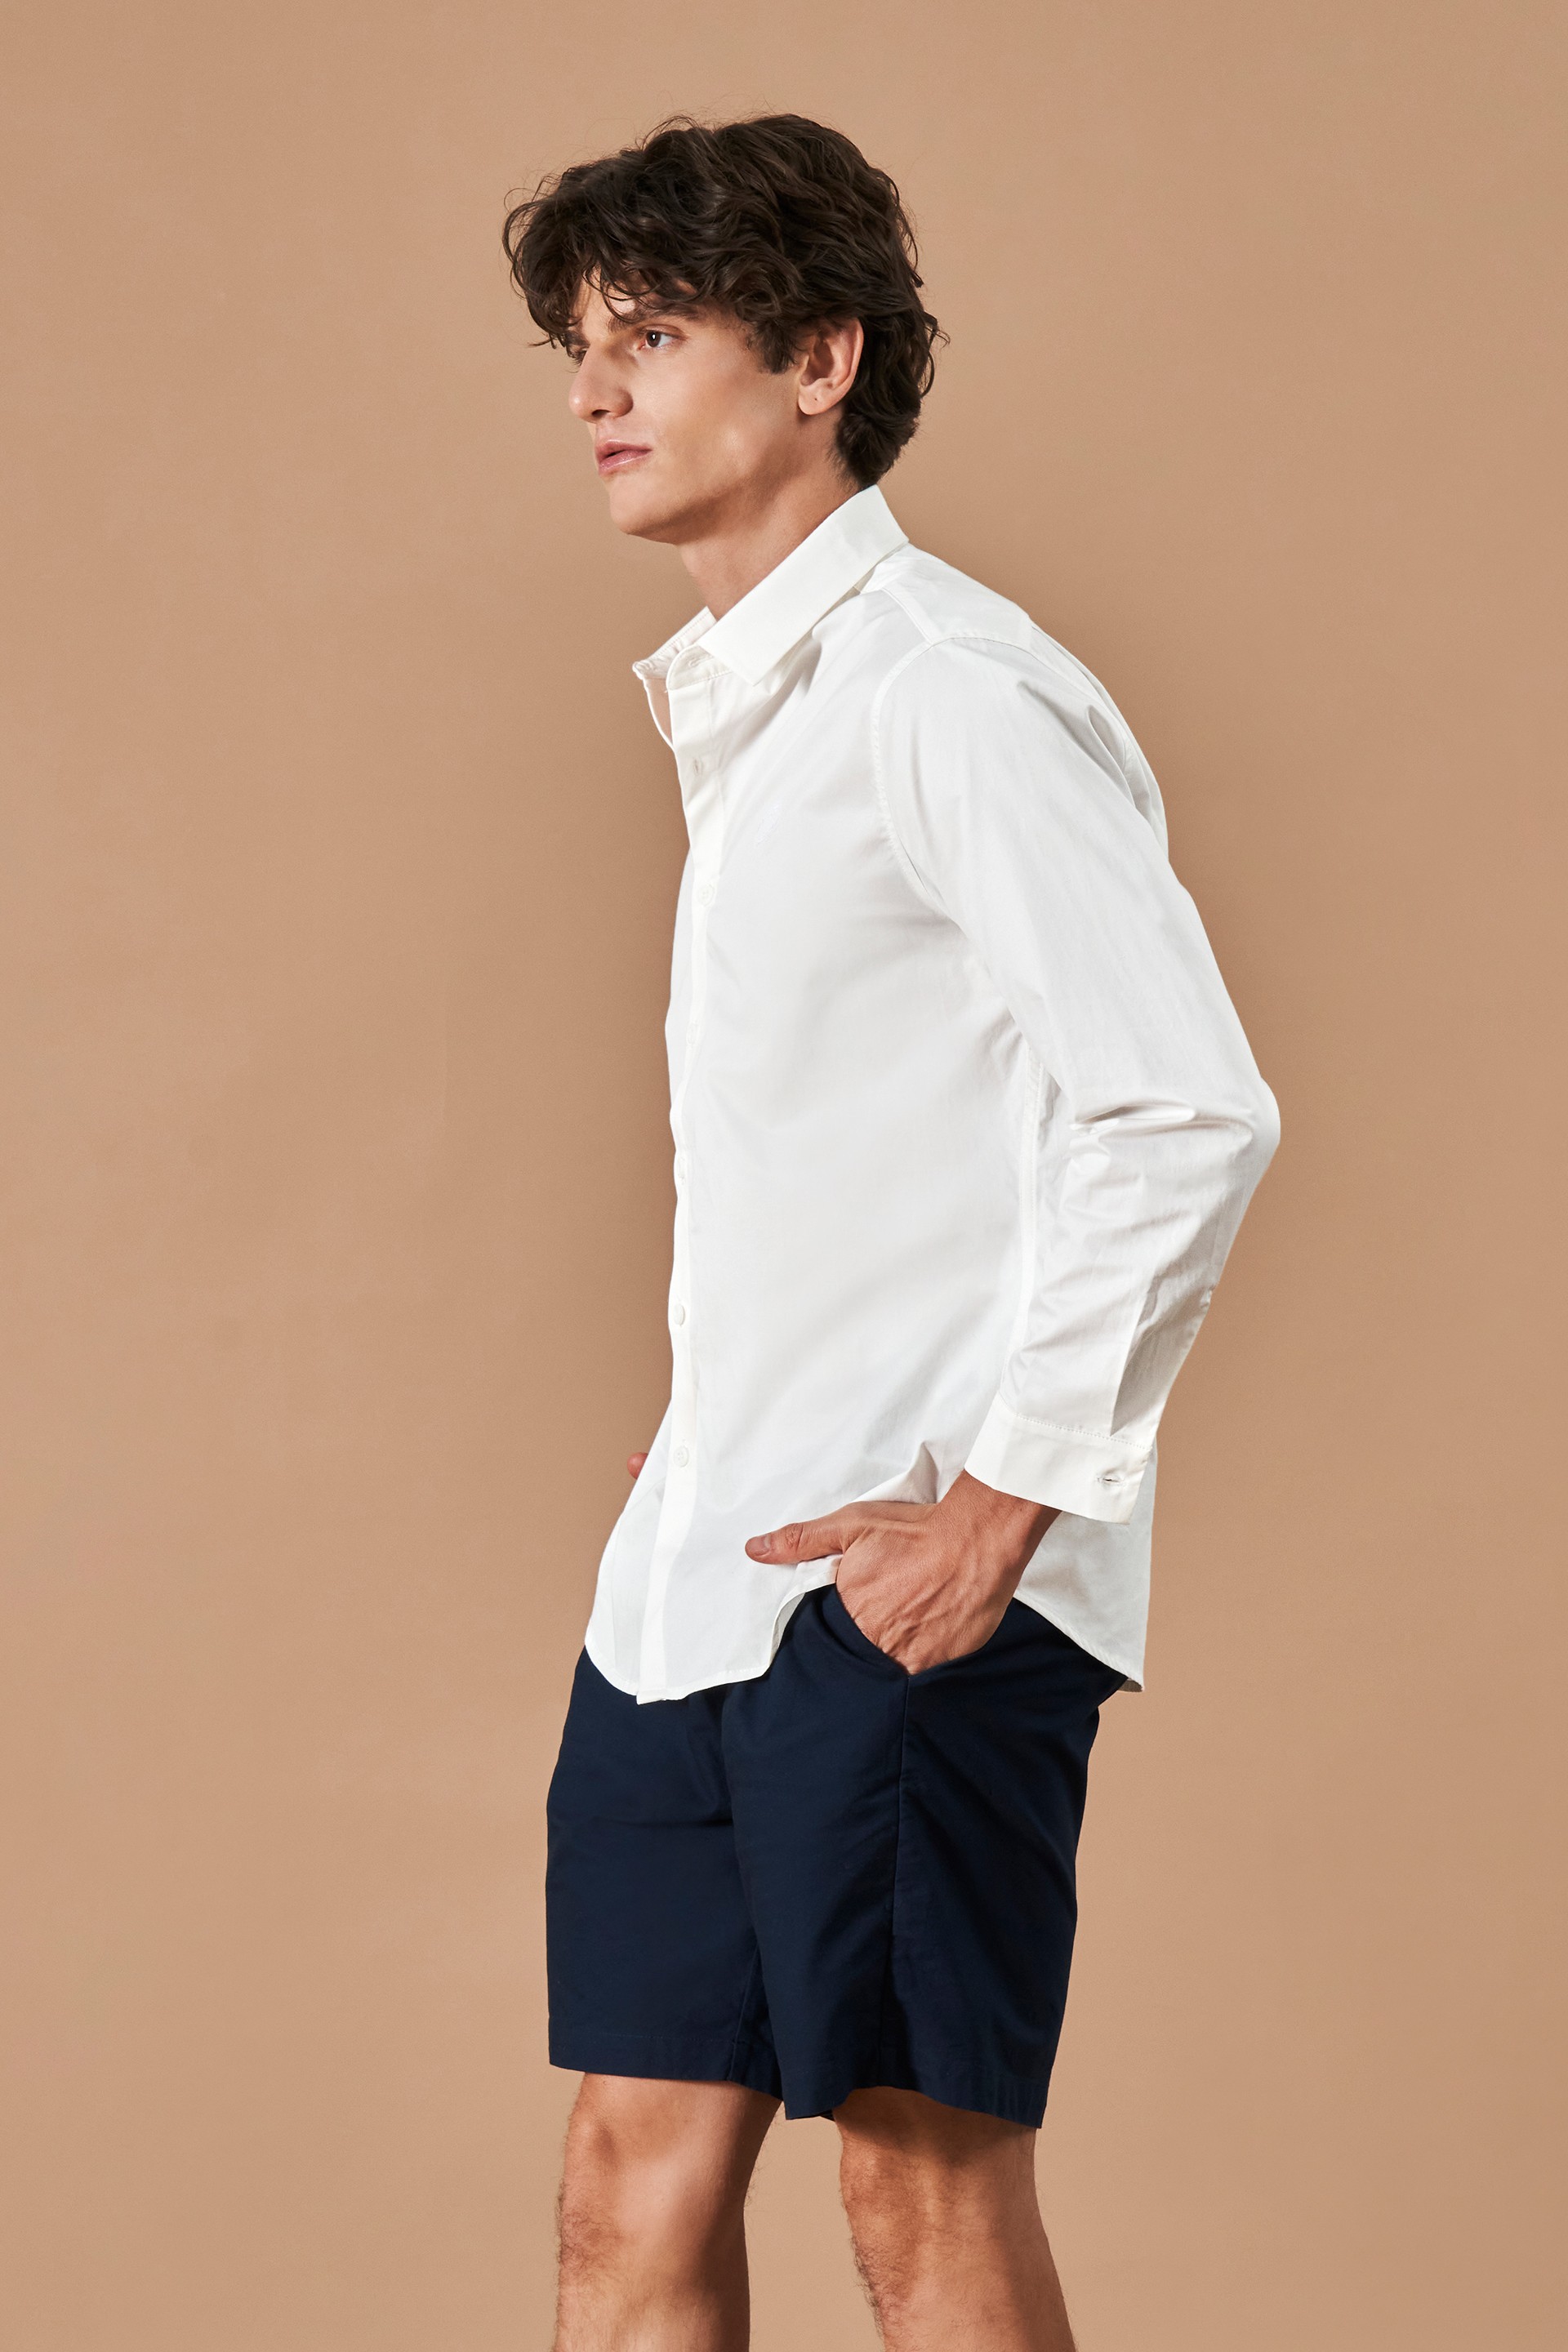 Kinder People Collared Cotton Shirt